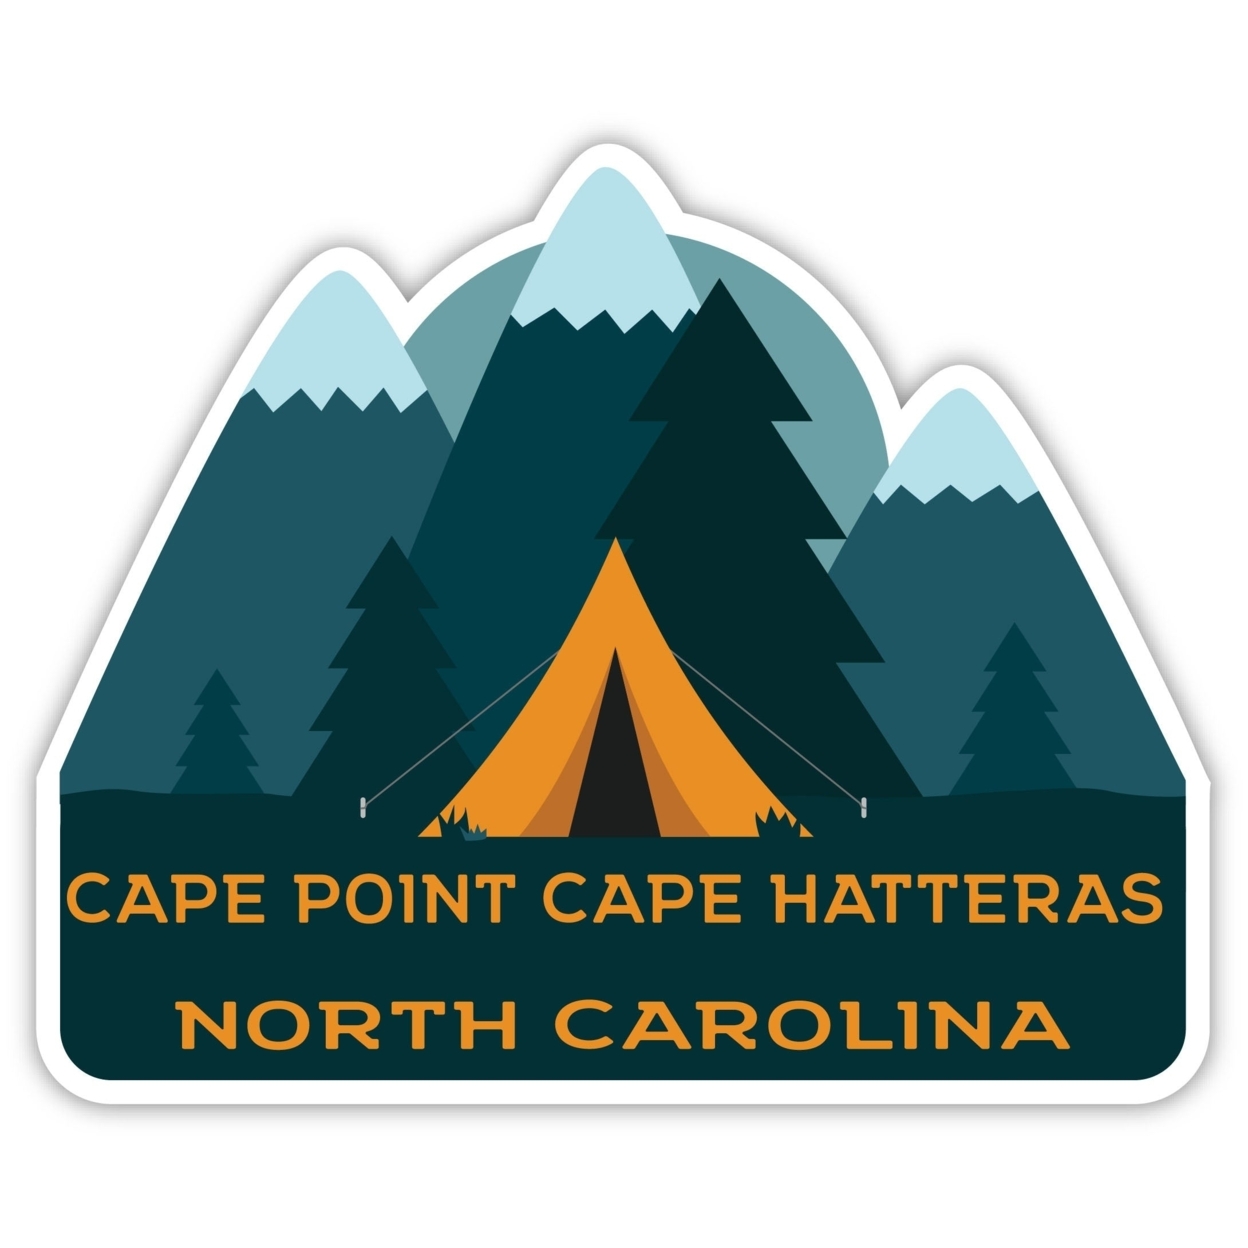 Cape Point Cape Hatteras North Carolina Souvenir Decorative Stickers (Choose Theme And Size) - 4-Pack, 4-Inch, Tent